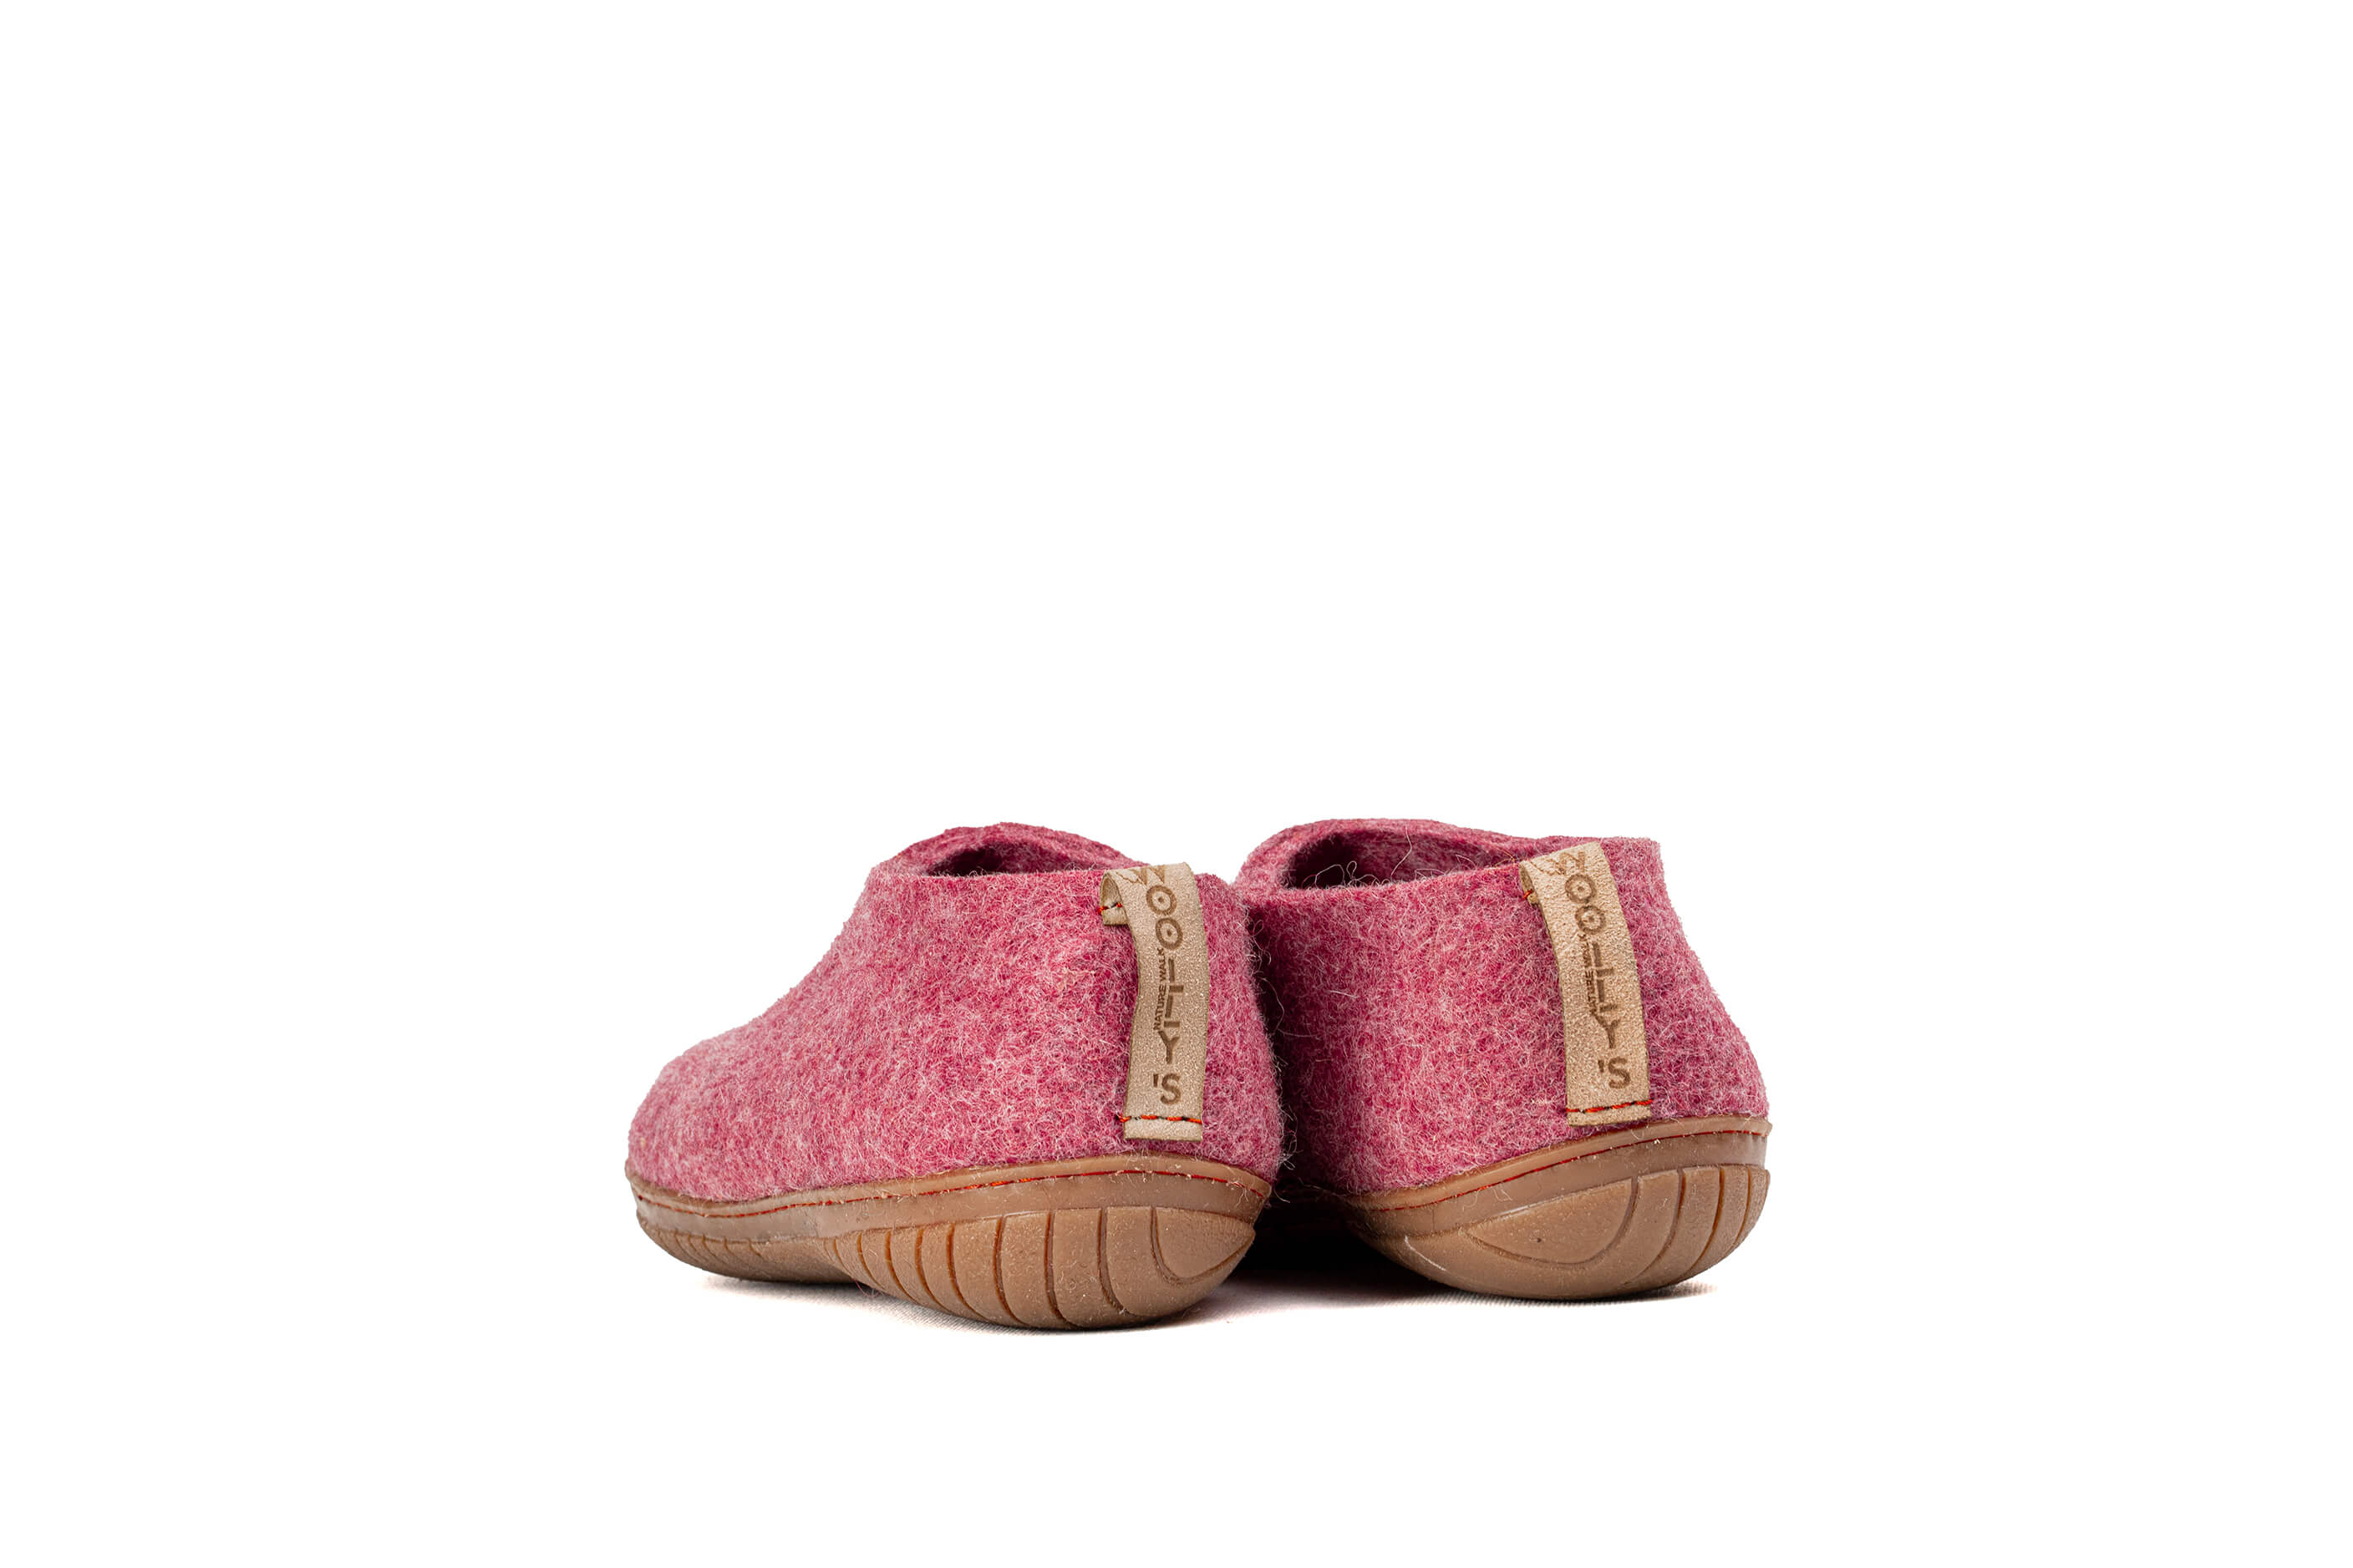 Outdoor Shoes With Rubber Sole - Cherry Pink